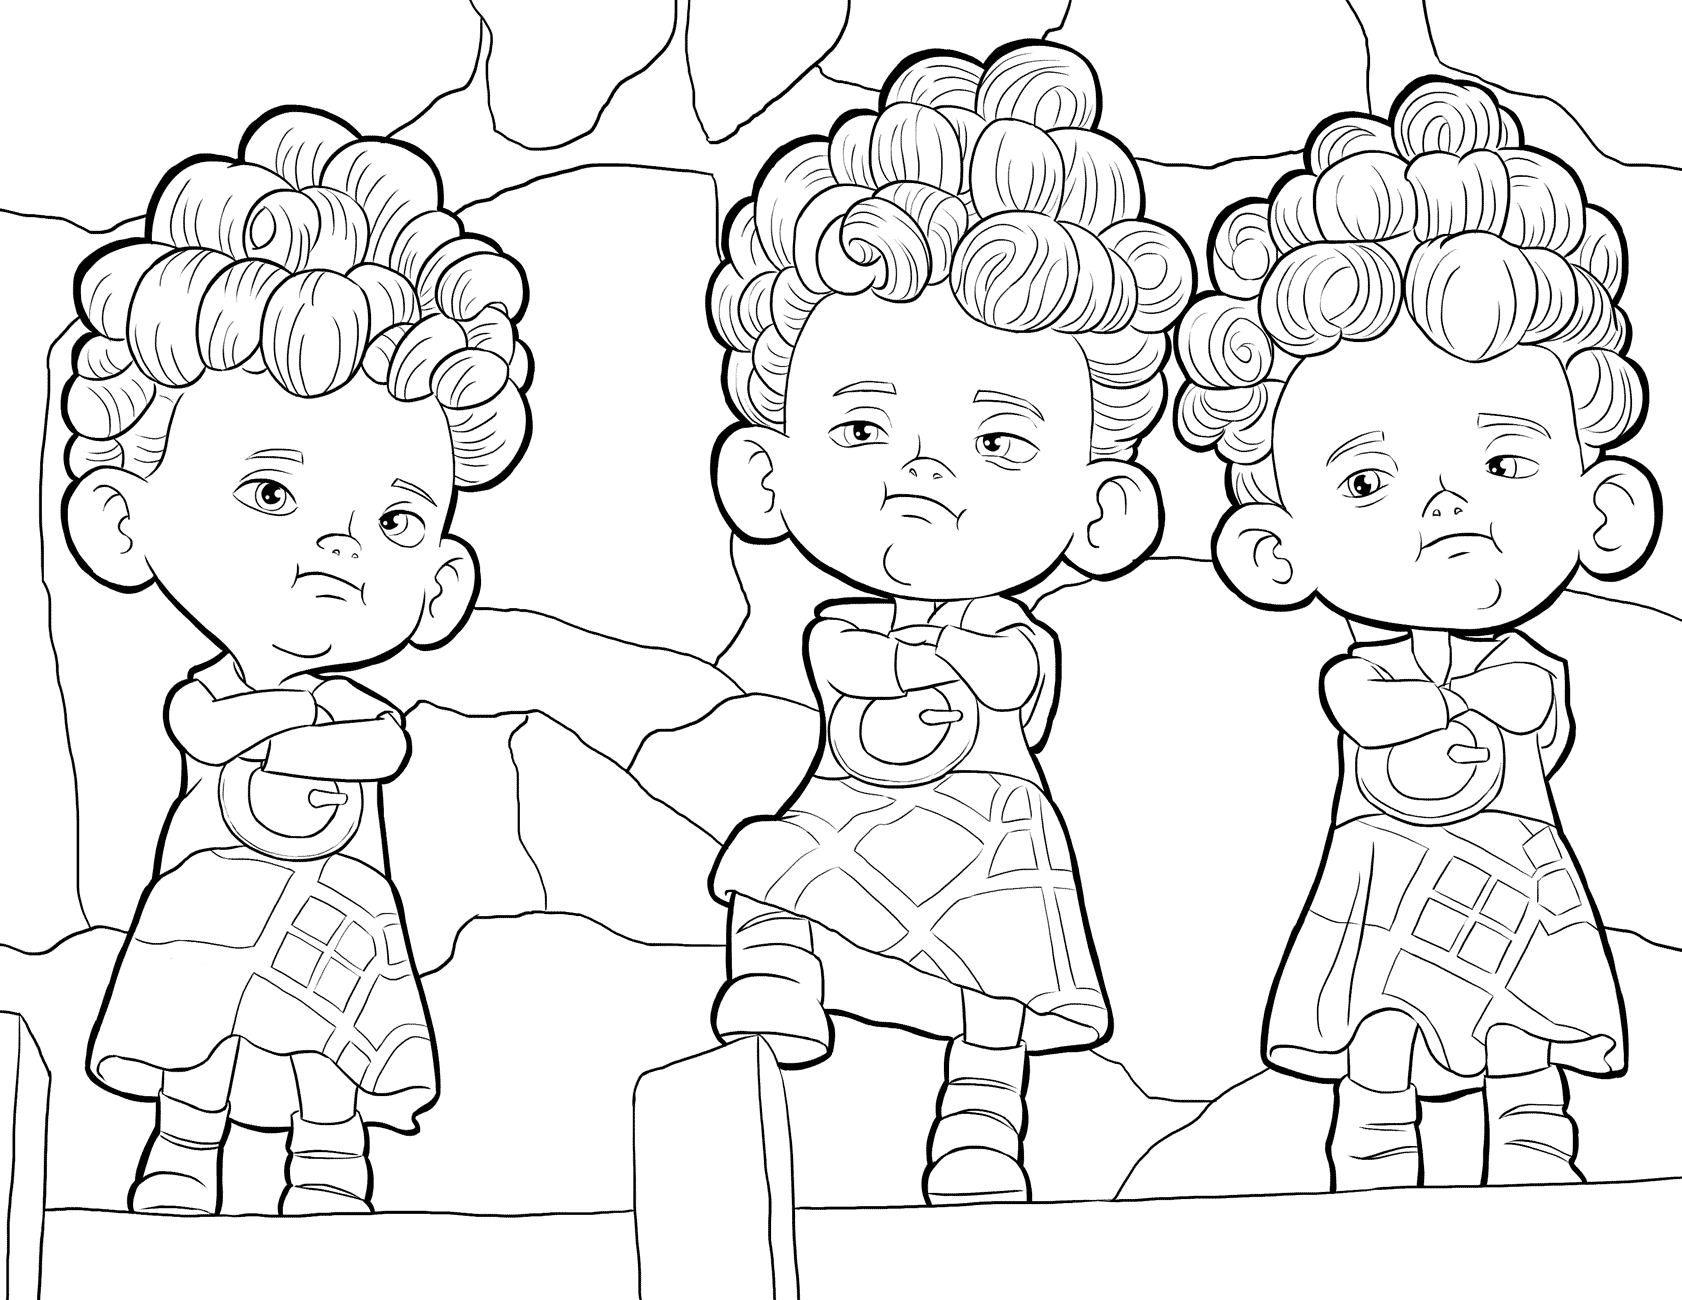 Download Coloring page - Meridas Younger brothers